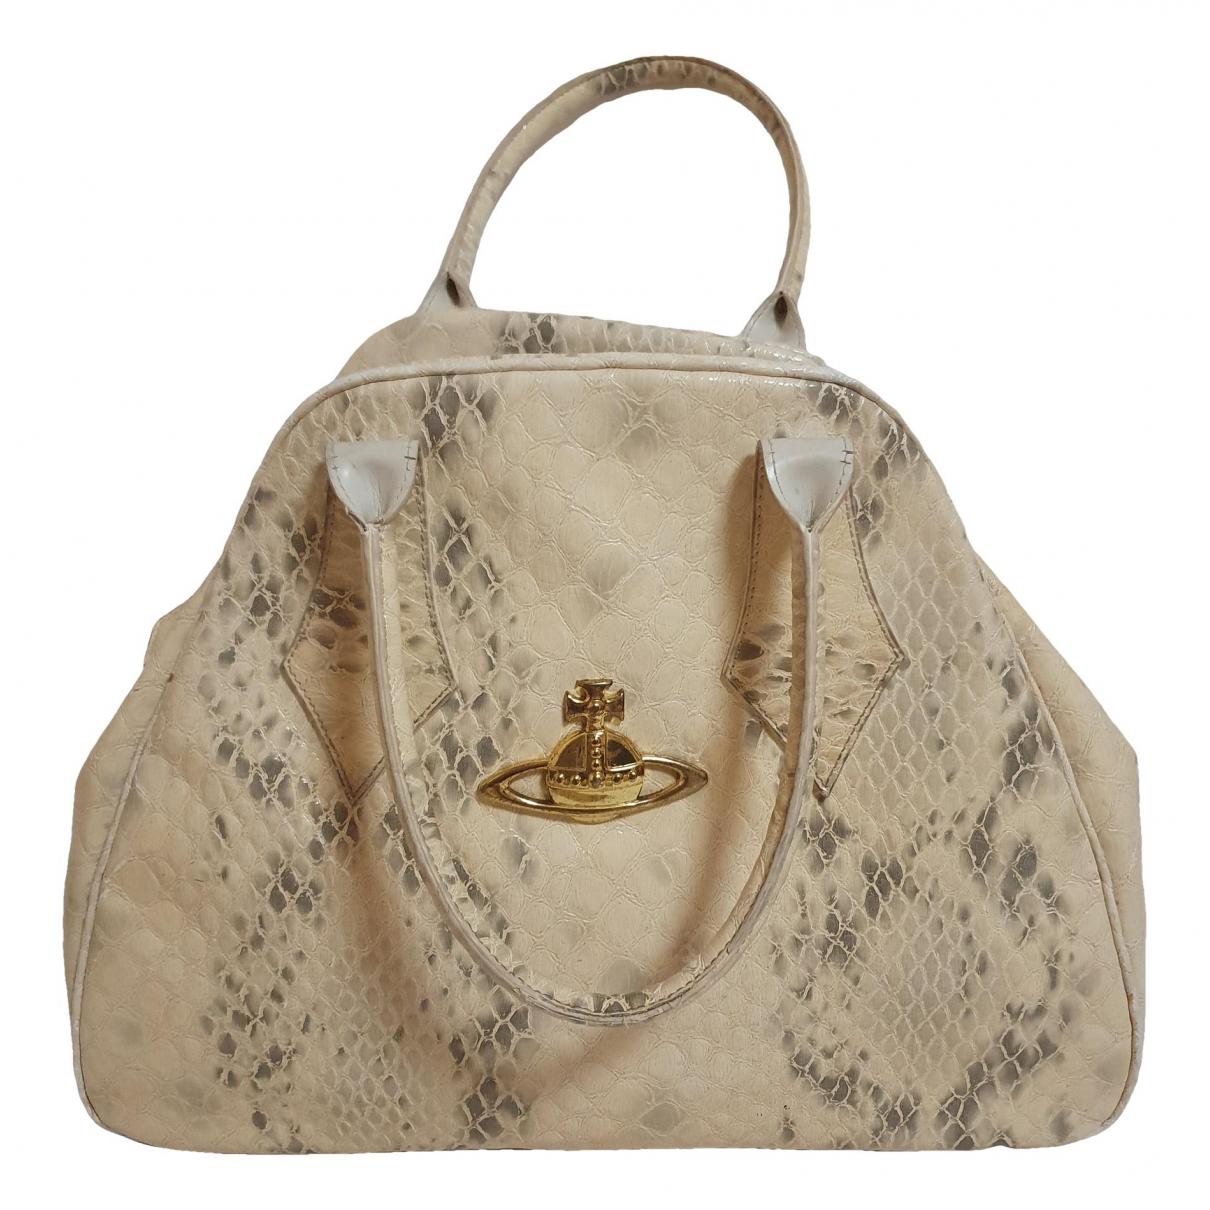 Vivienne Westwood Chancery - 2 For Sale on 1stDibs